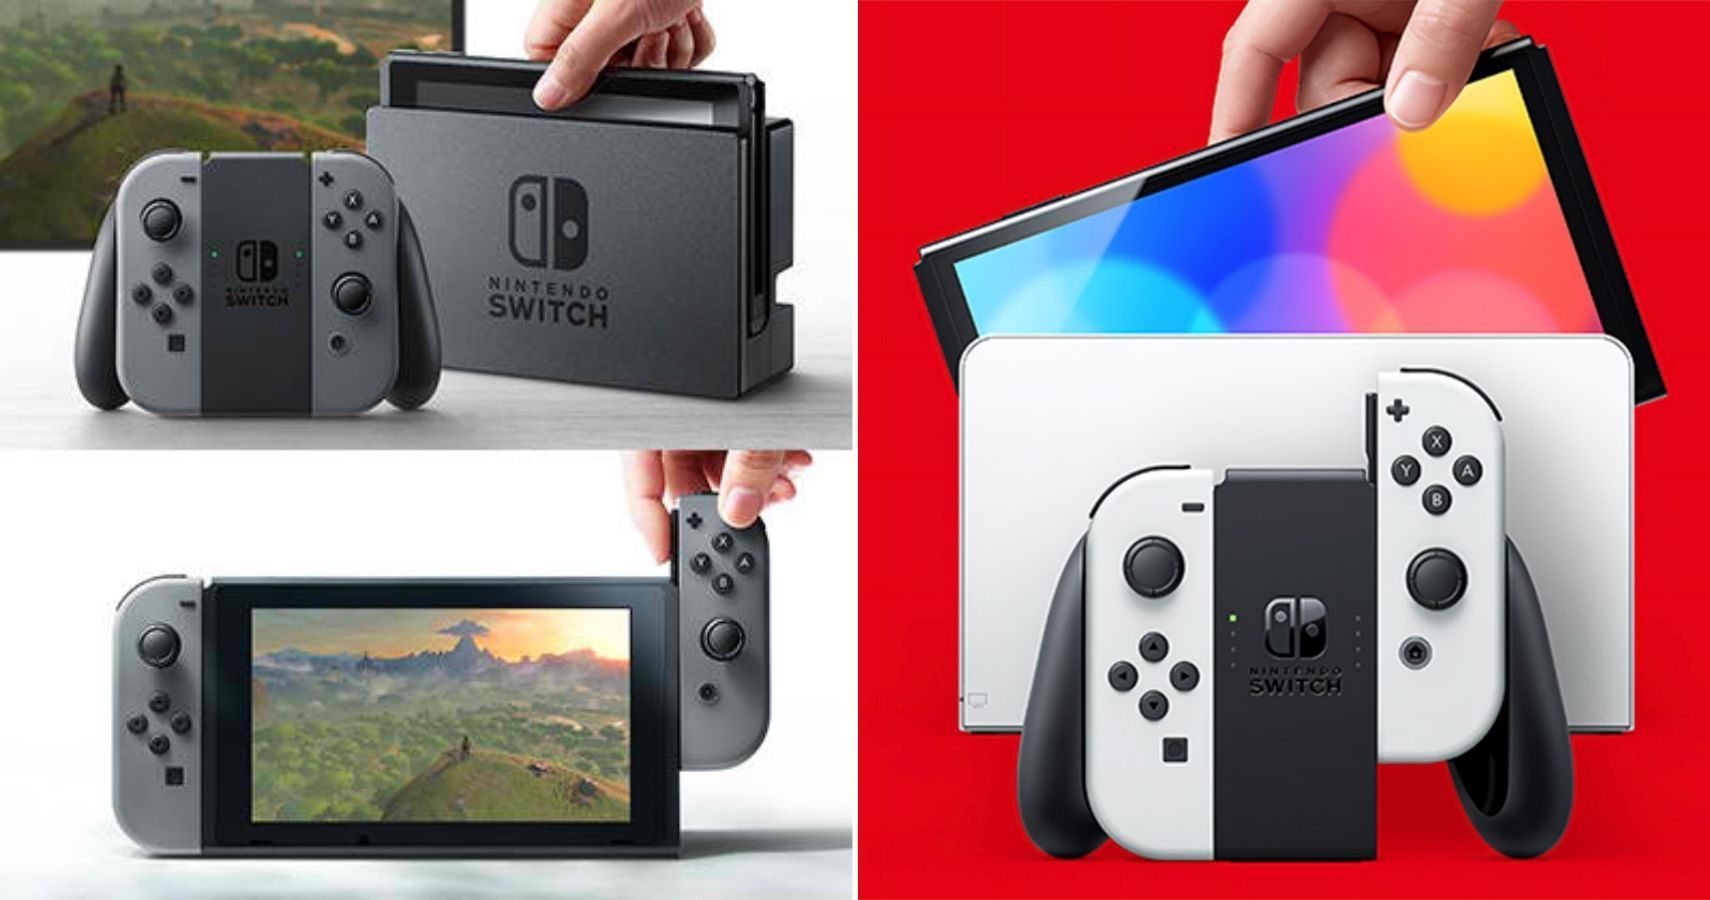 A split screen of the original Switch and the OLED model